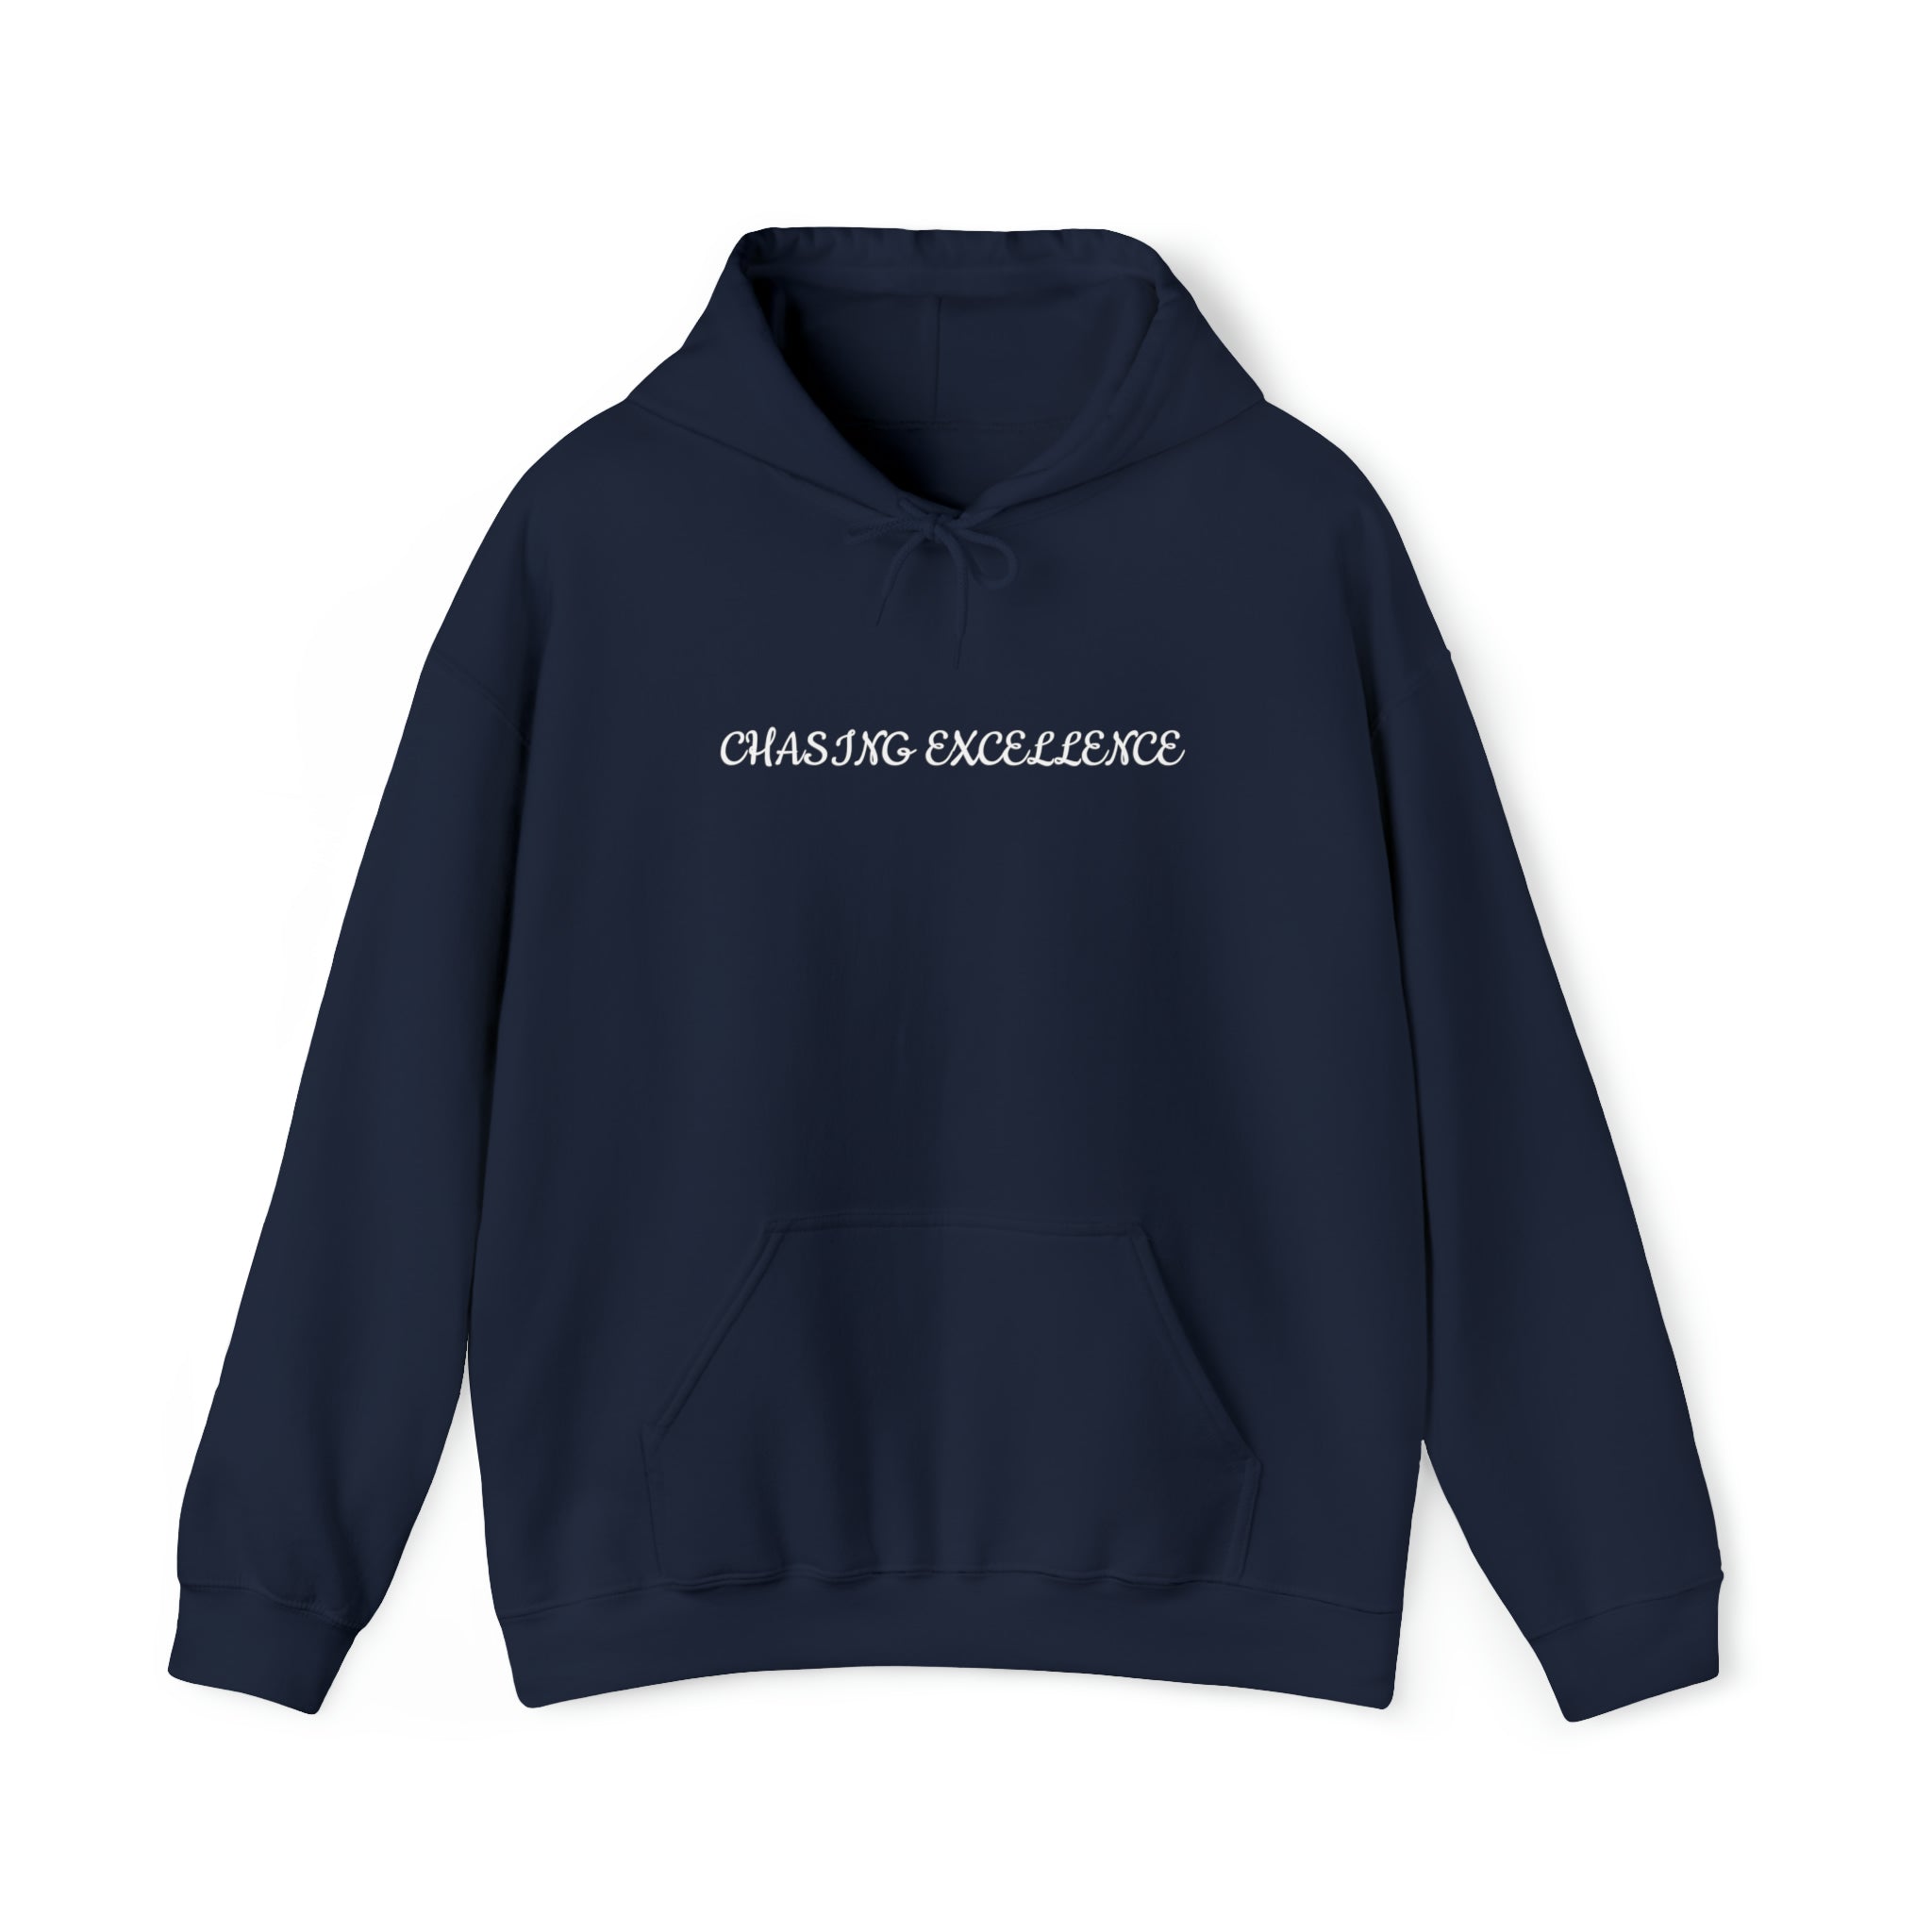 Chasing Excellence Hoodie